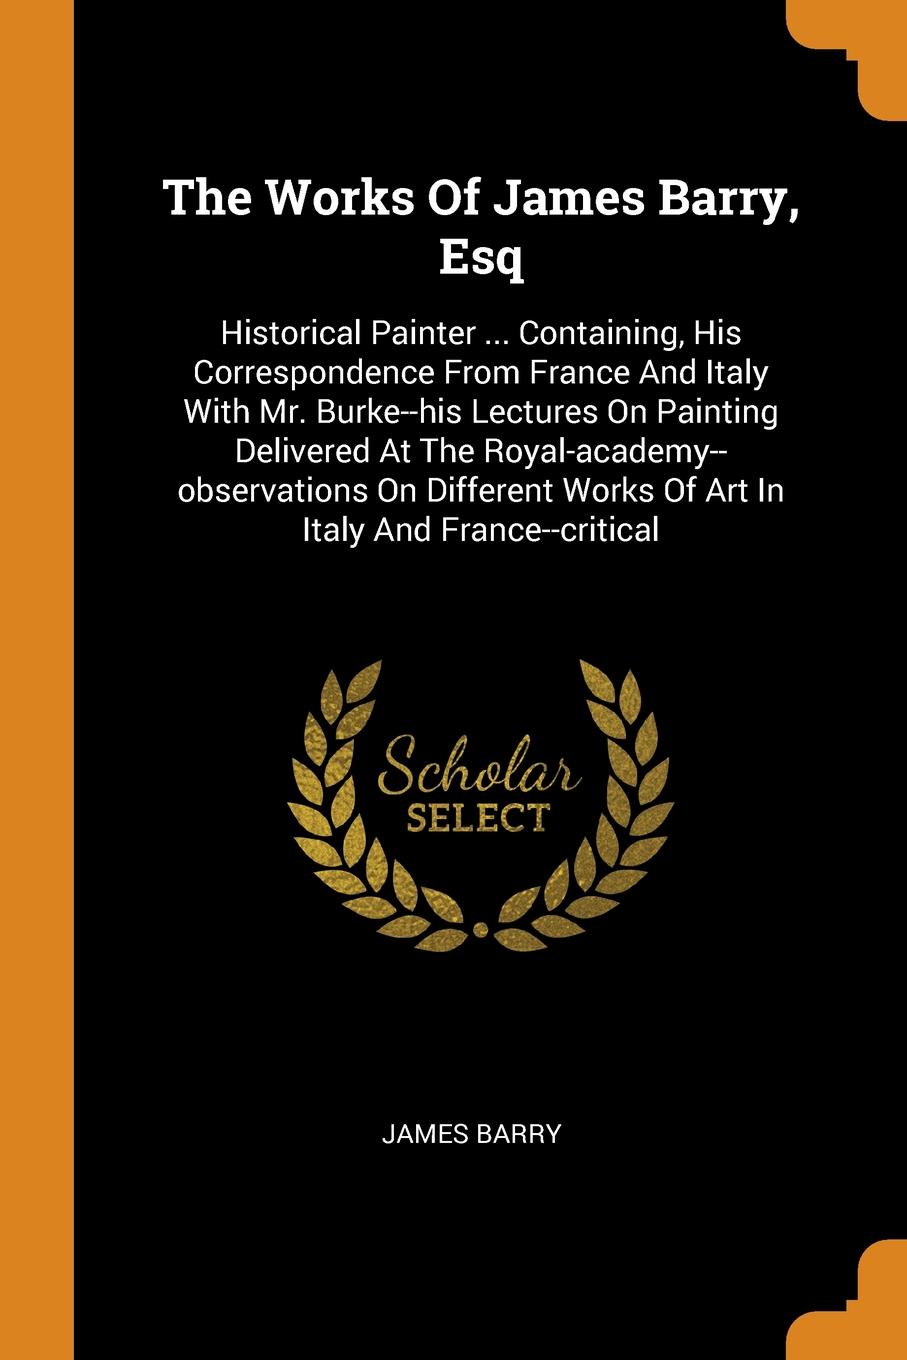 The Works Of James Barry, Esq. Historical Painter ... Containing, His Correspondence From France And Italy With Mr. Burke--his Lectures On Painting Delivered At The Royal-academy--observations On Different Works Of Art In Italy And France--critical